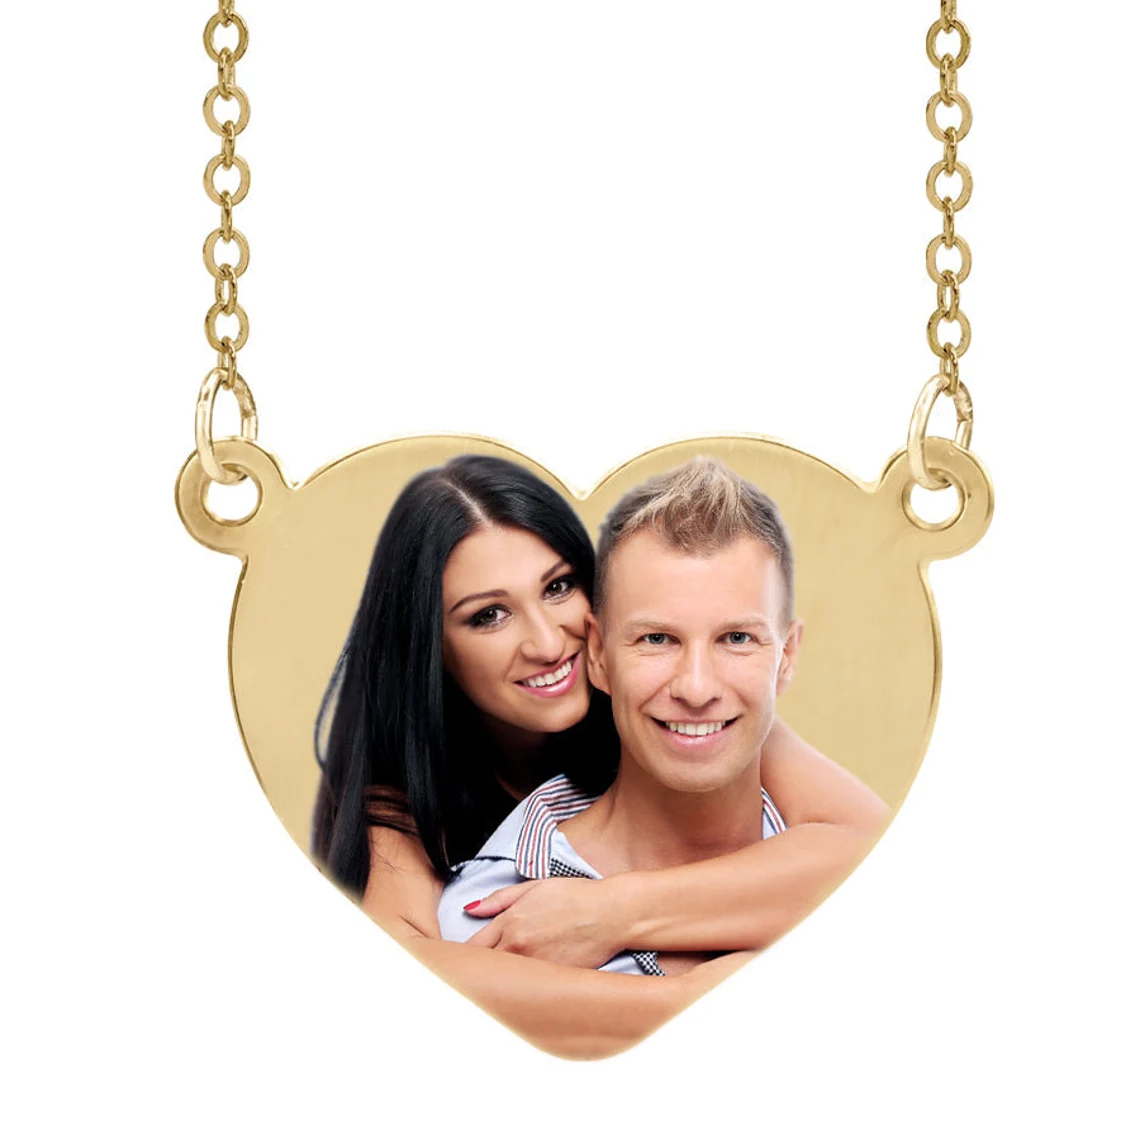 Heart Shaped Pendant Personalized Photo Necklace